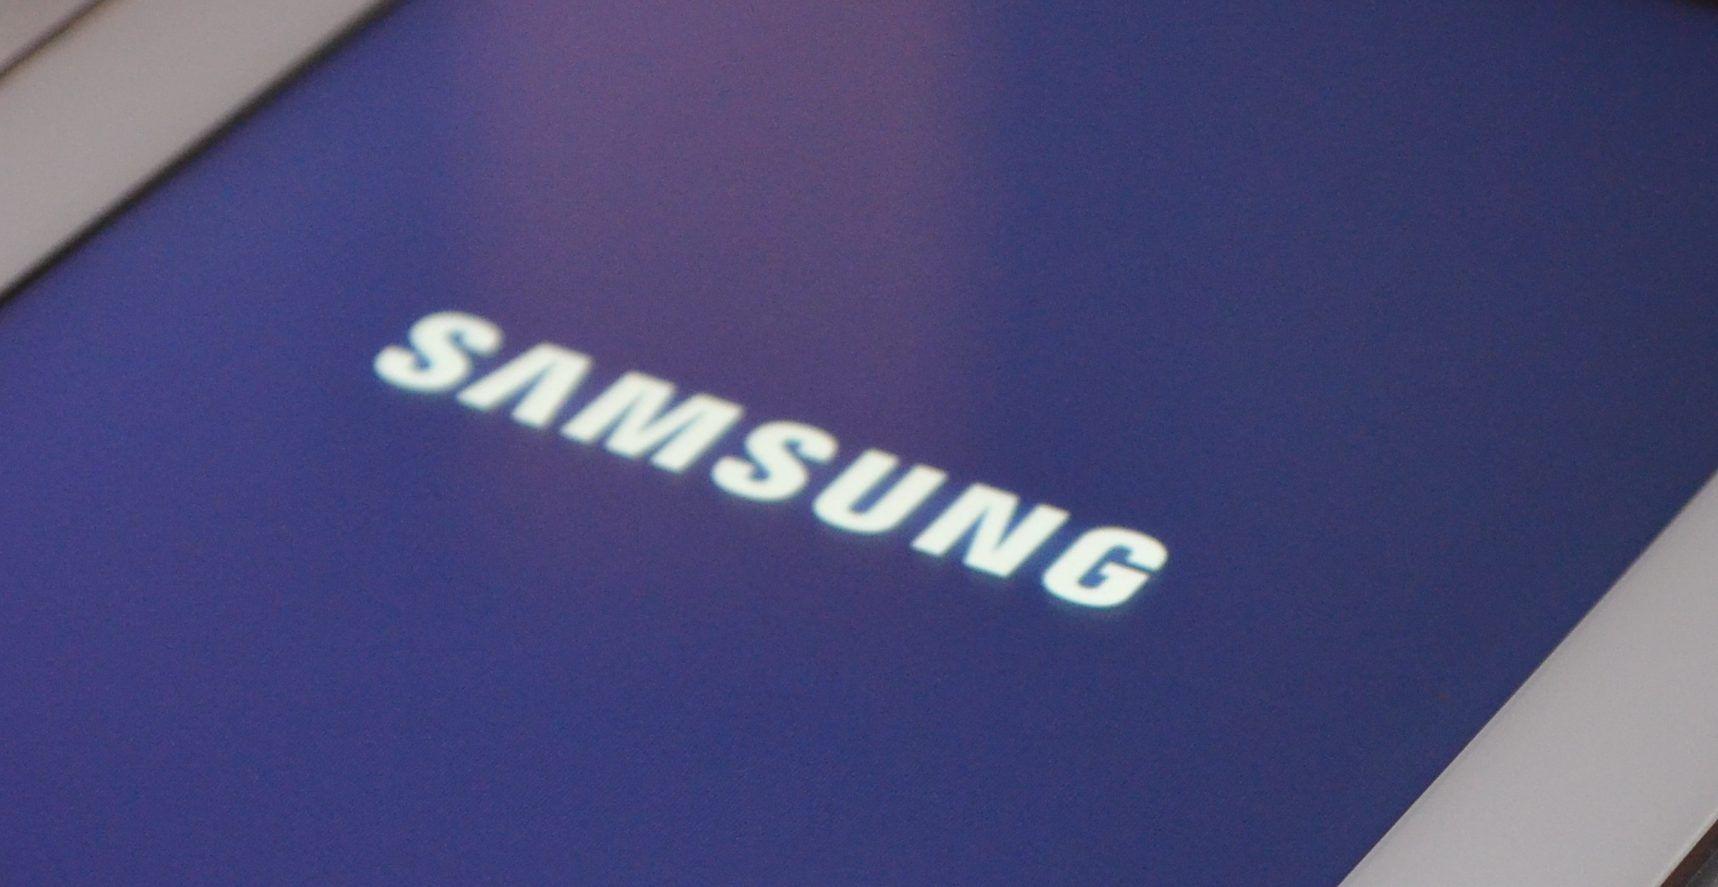 Messaging Smasmung Logo - Fix Android Won't Turn On Or Stuck on Samsung Logo Screen | Technobezz